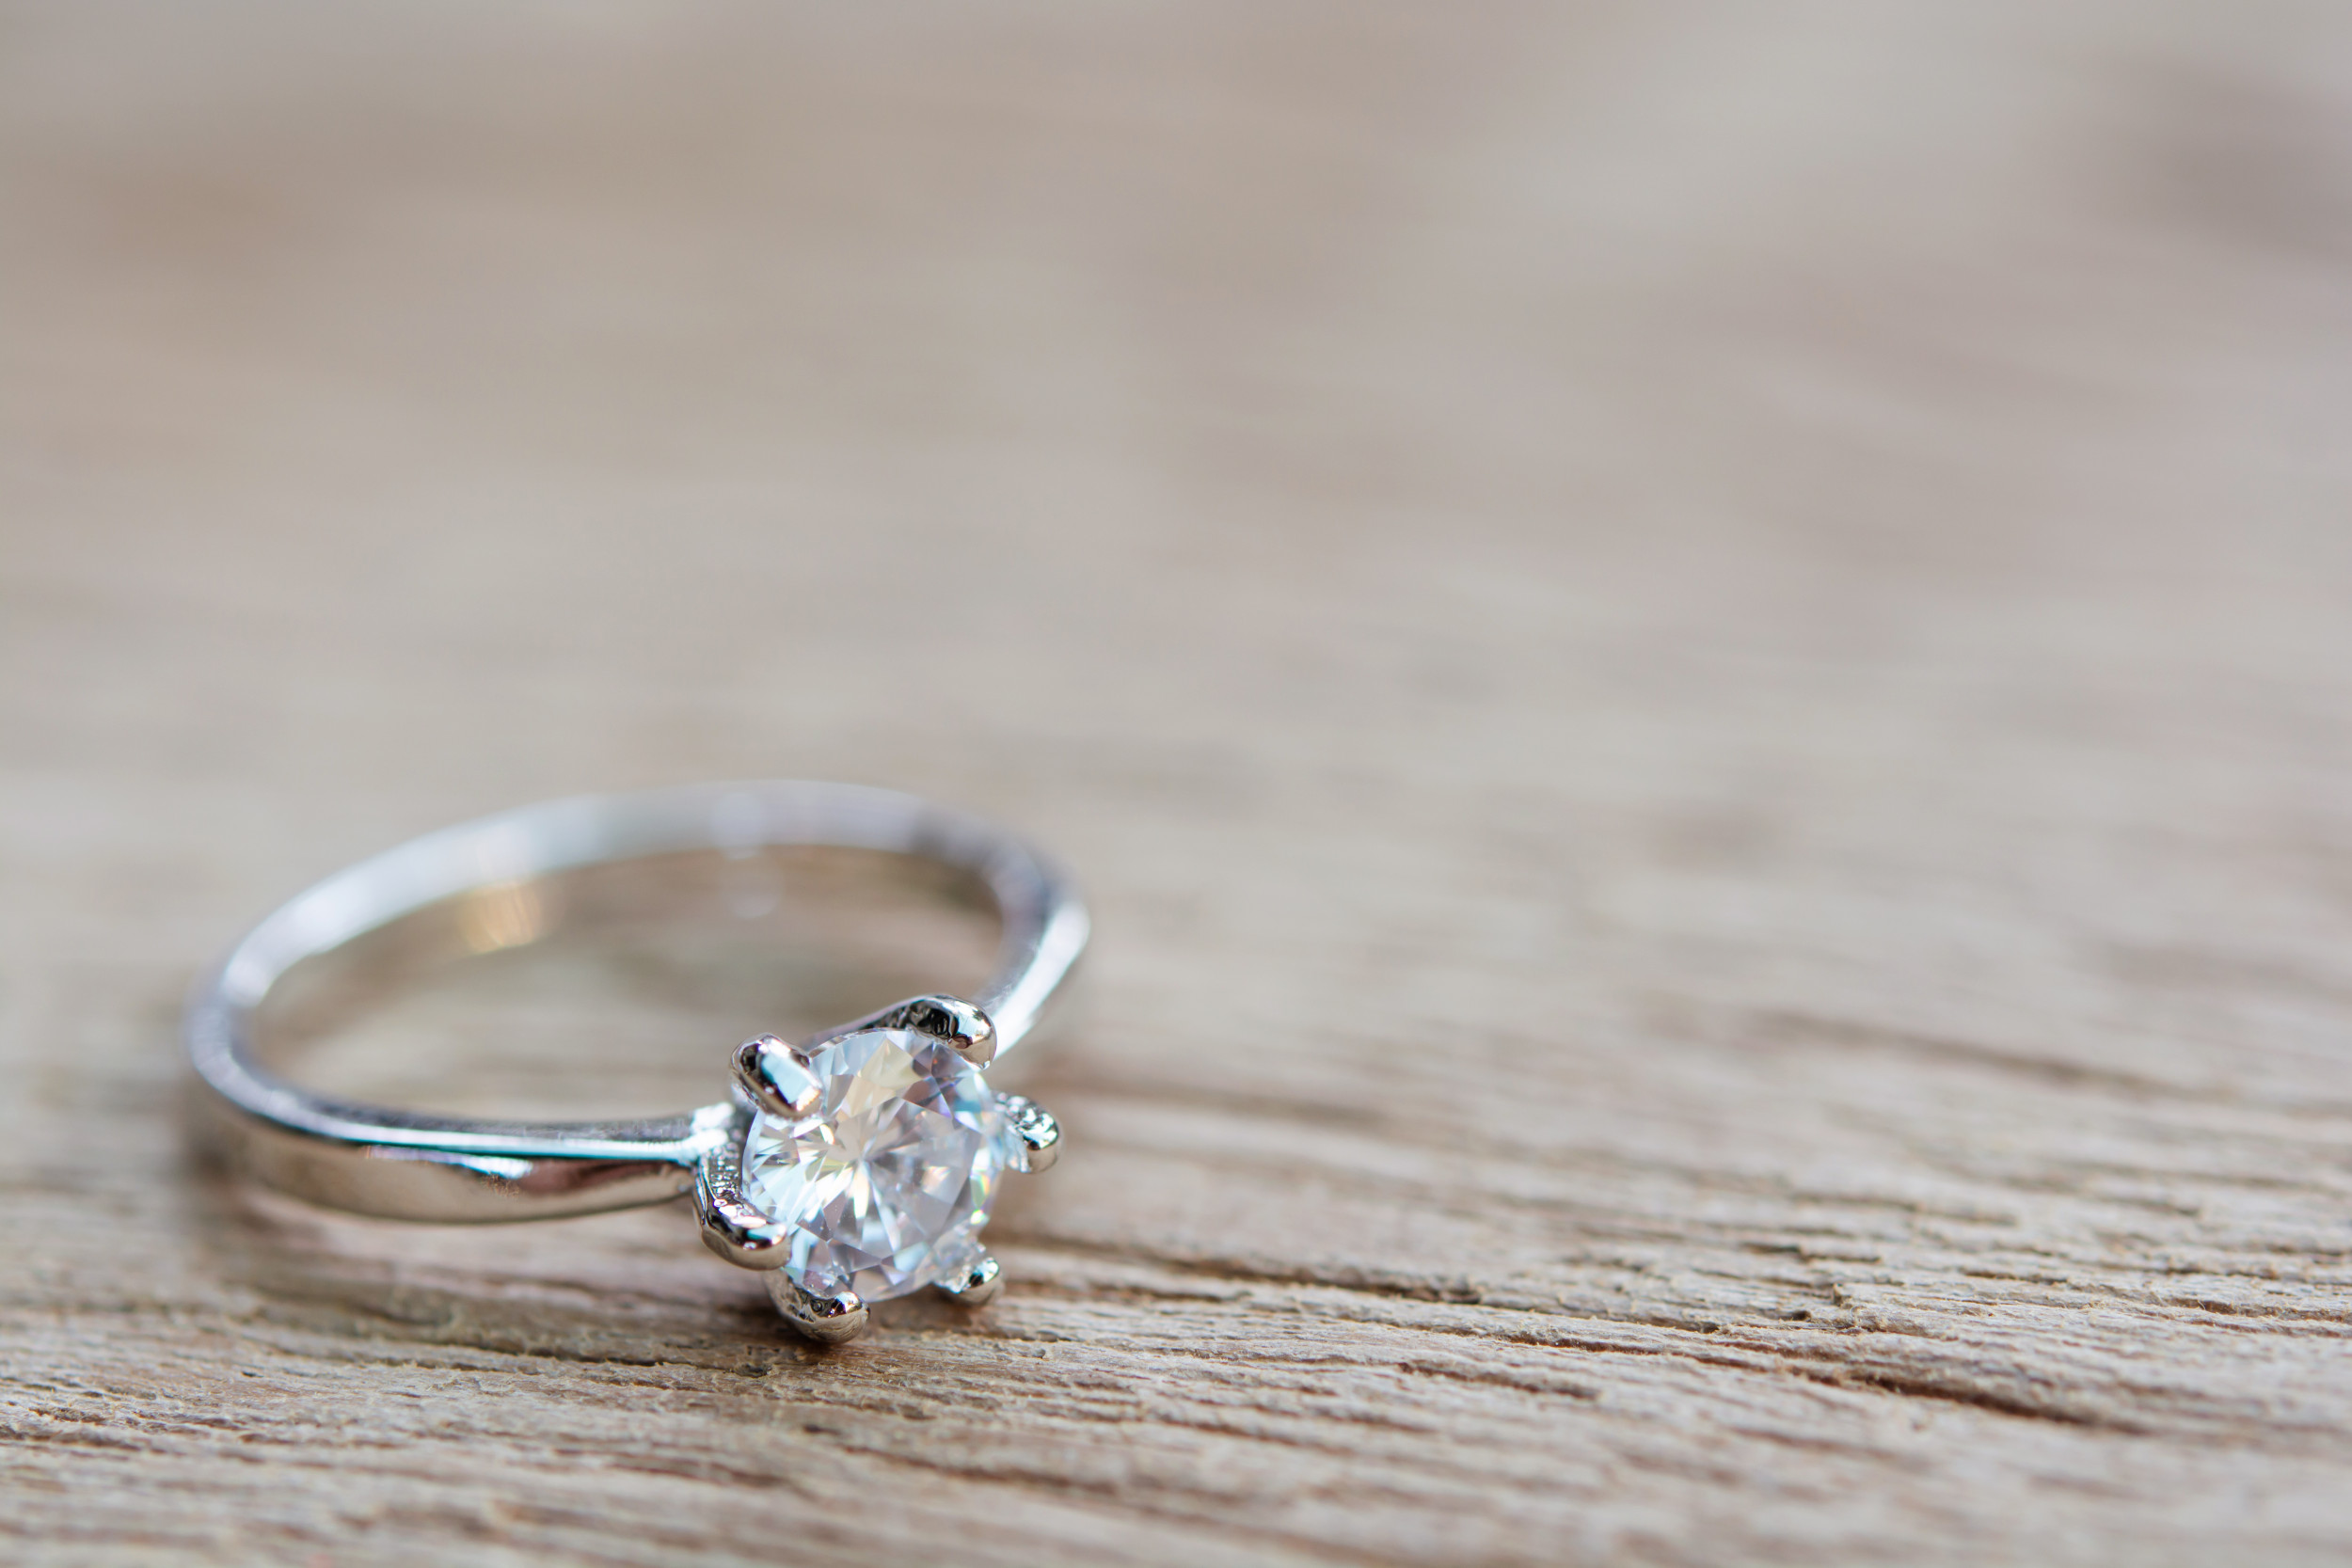 We tried Lily Arkwright's lab-grown diamond ring to see how it compared to  the real deal | The Independent